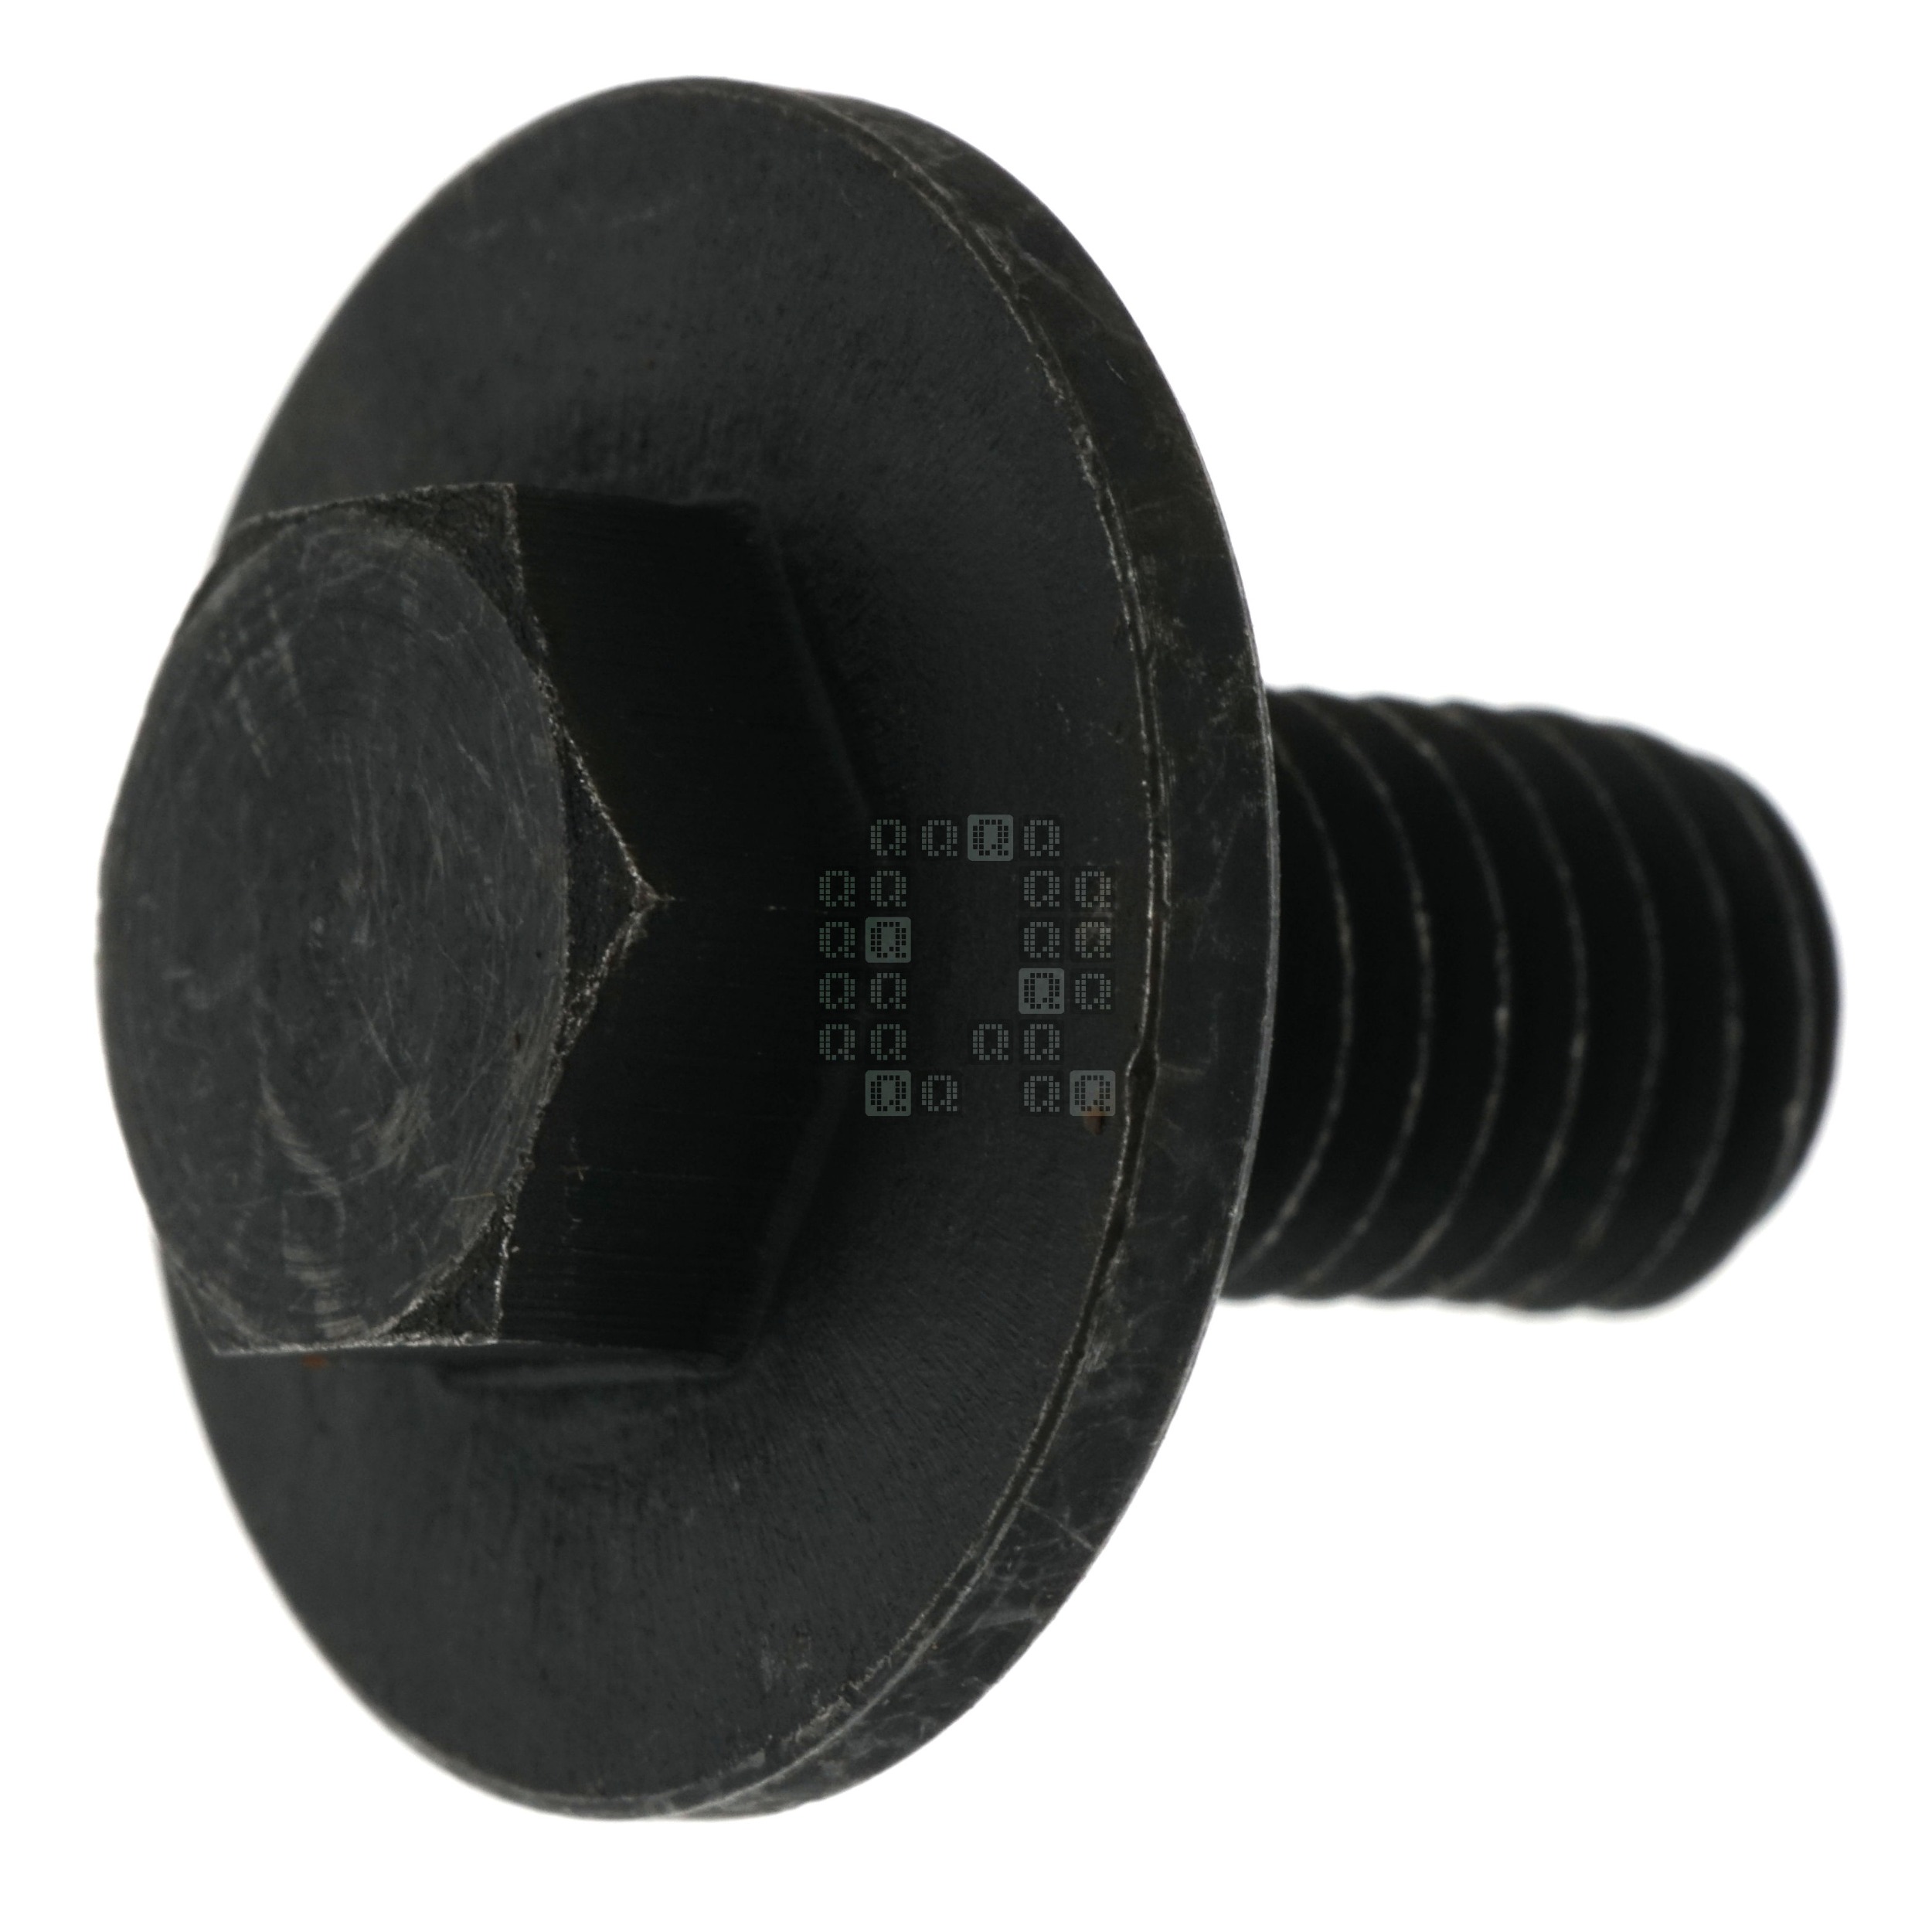 Metabo HPT 320-971 M8-1.25 x 15.5mm Bolt with Flange